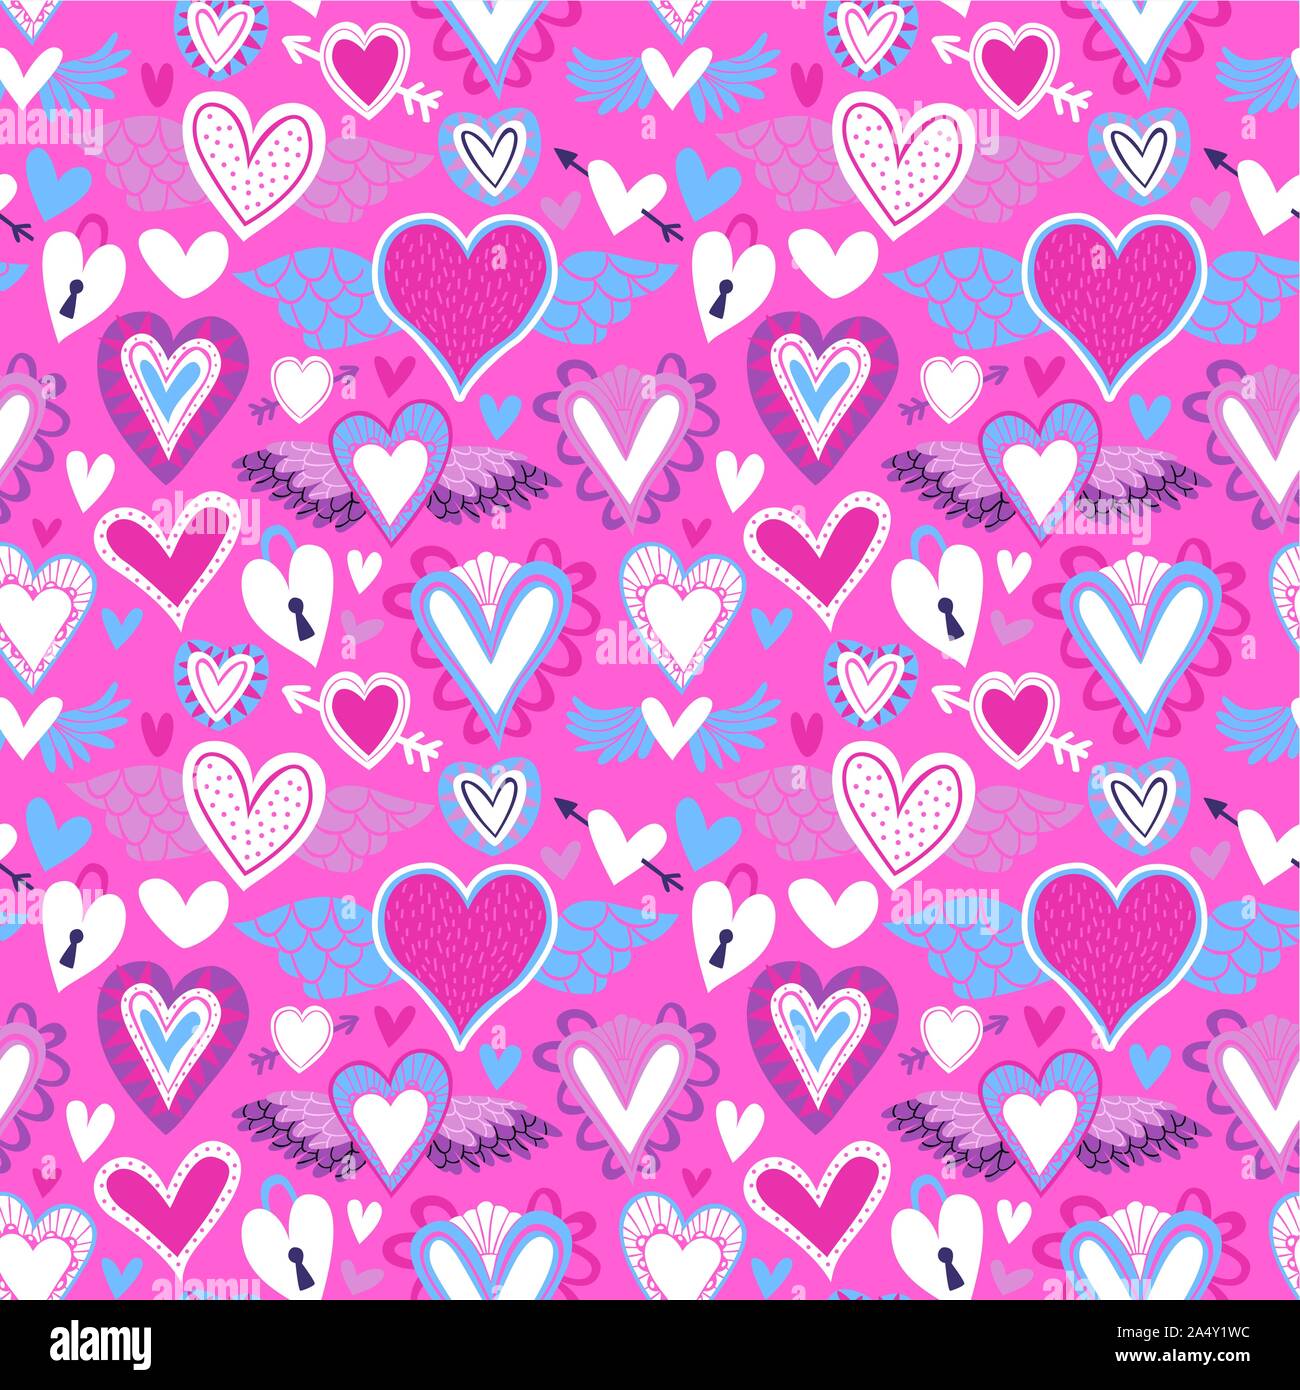 Heart shape seamless pattern, pink cupid hearts in flat cartoon art style for valentines day holiday or romantic event. Stock Vector